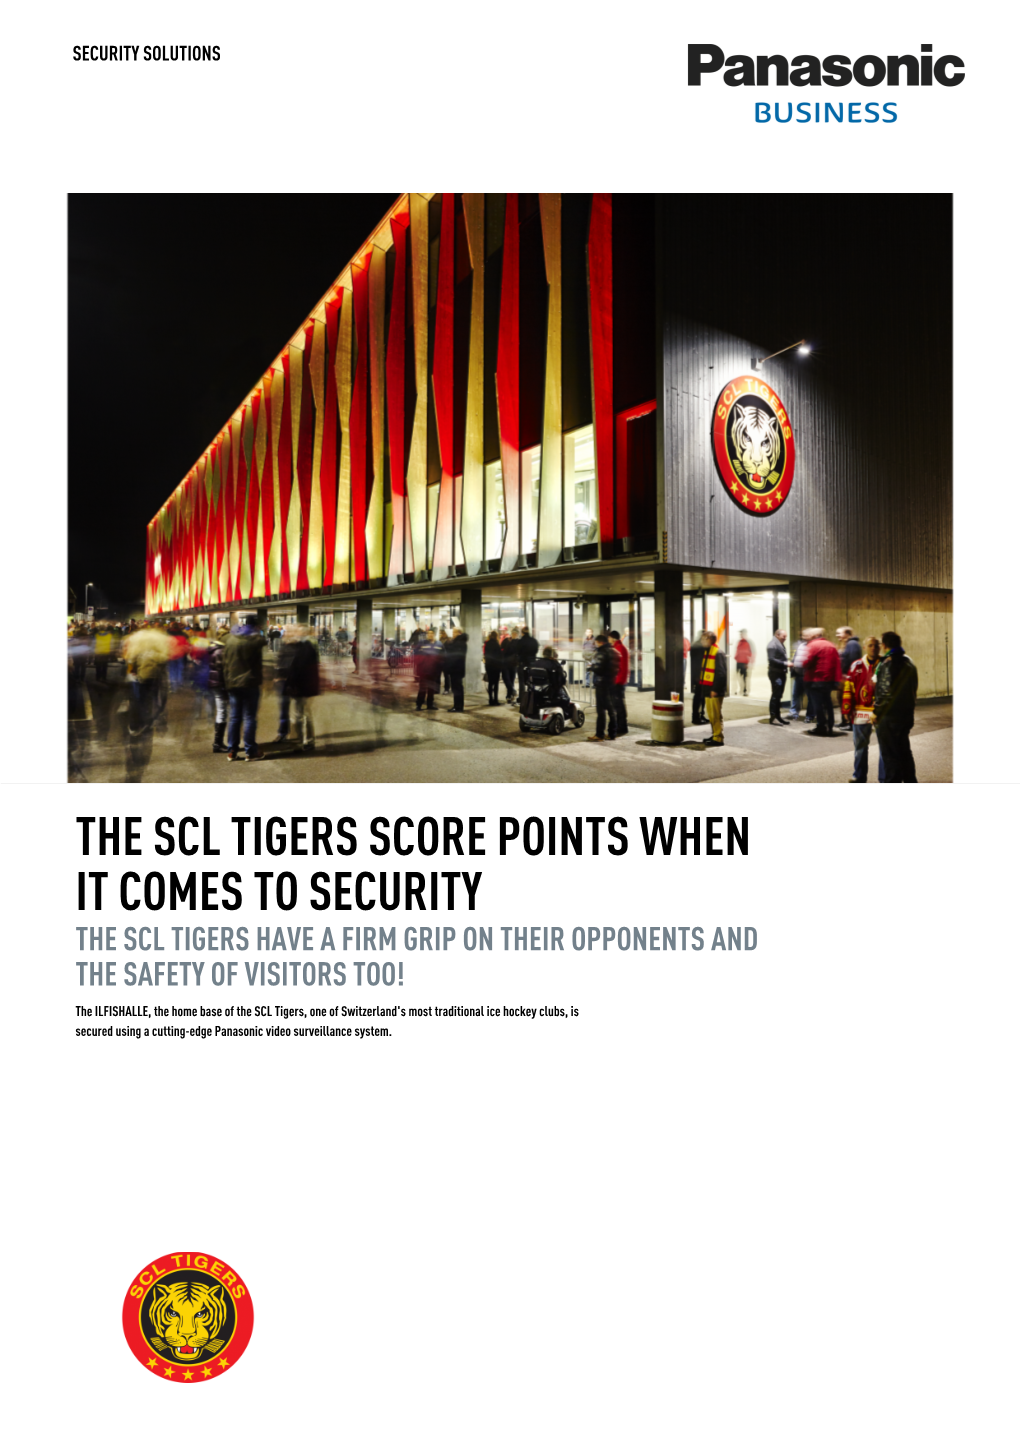 The Scl Tigers Score Points When It Comes to Security the Scl Tigers Have a Firm Grip on Their Opponents and the Safety of Visitors Too!